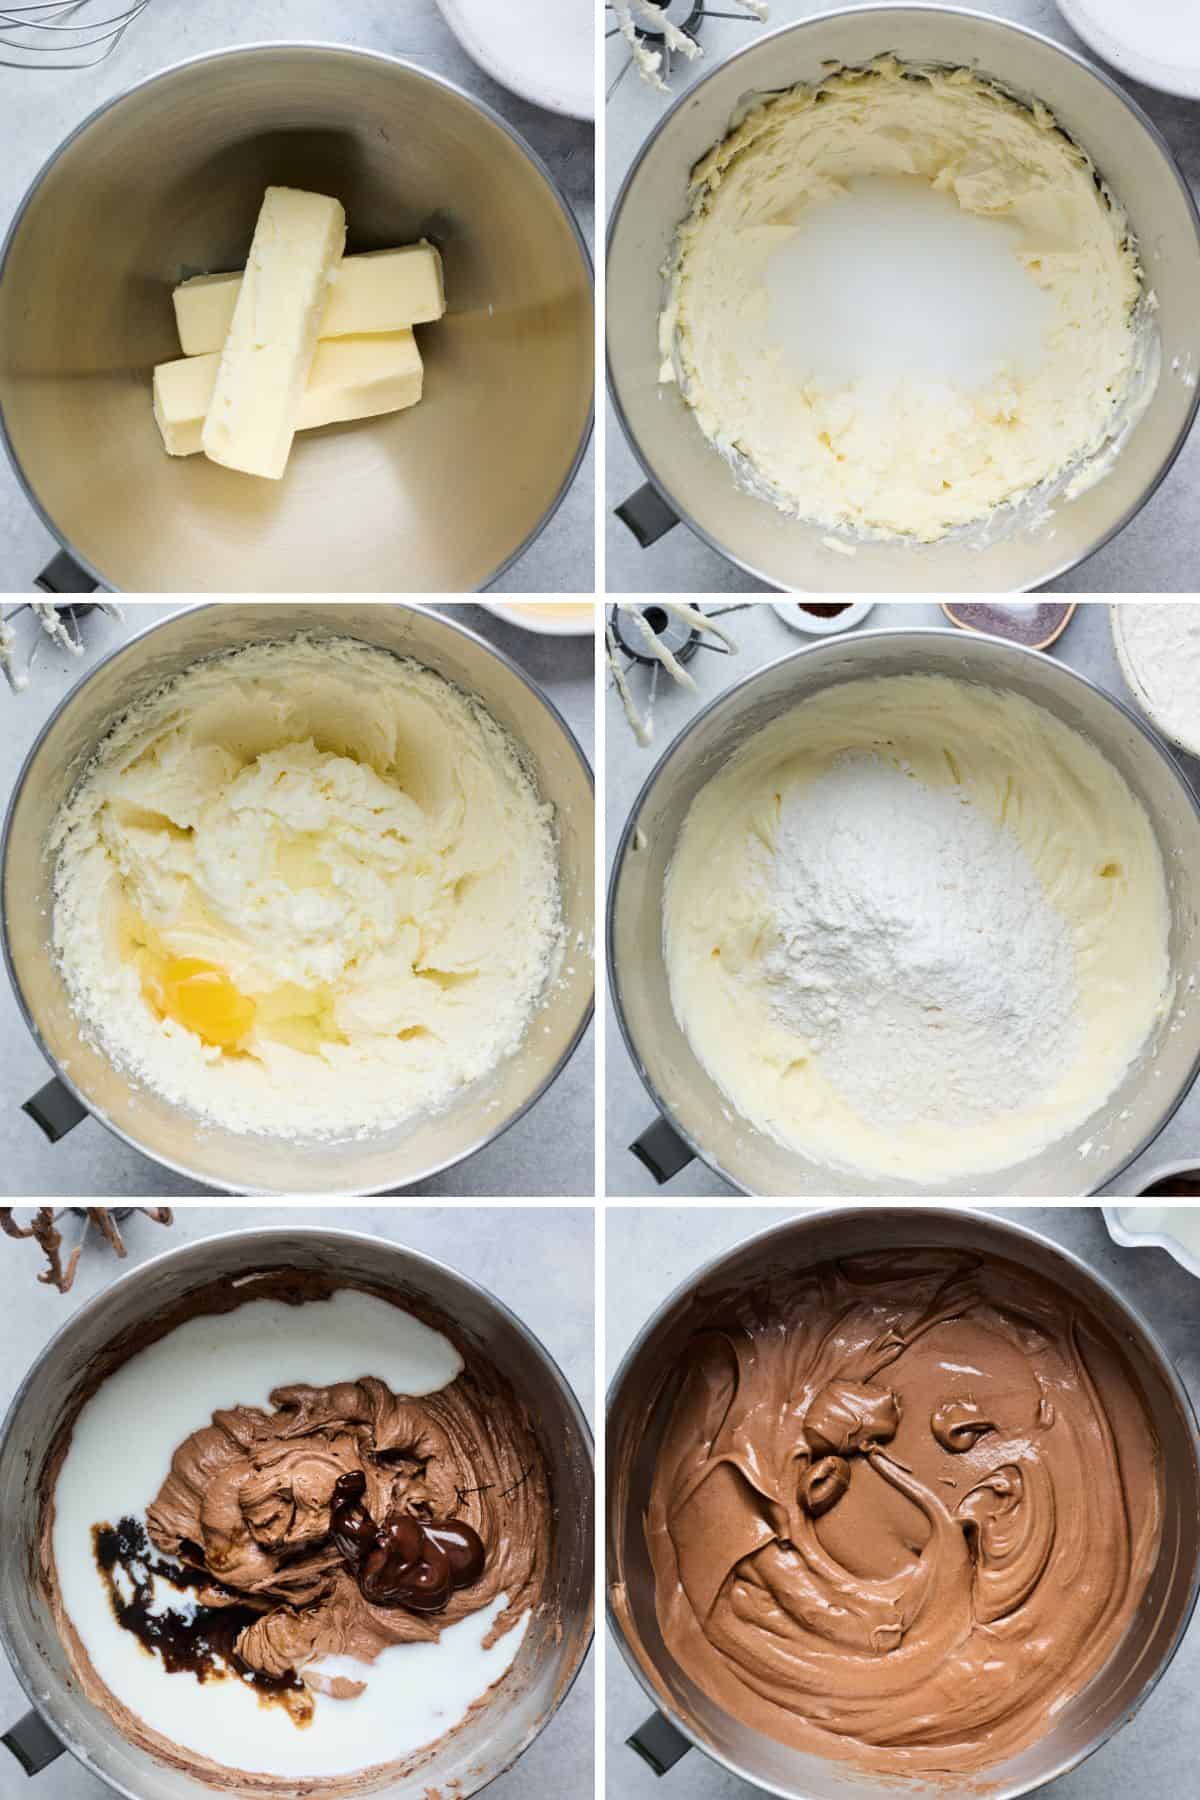 A collage of images showing the steps for mixing the cake batter. 